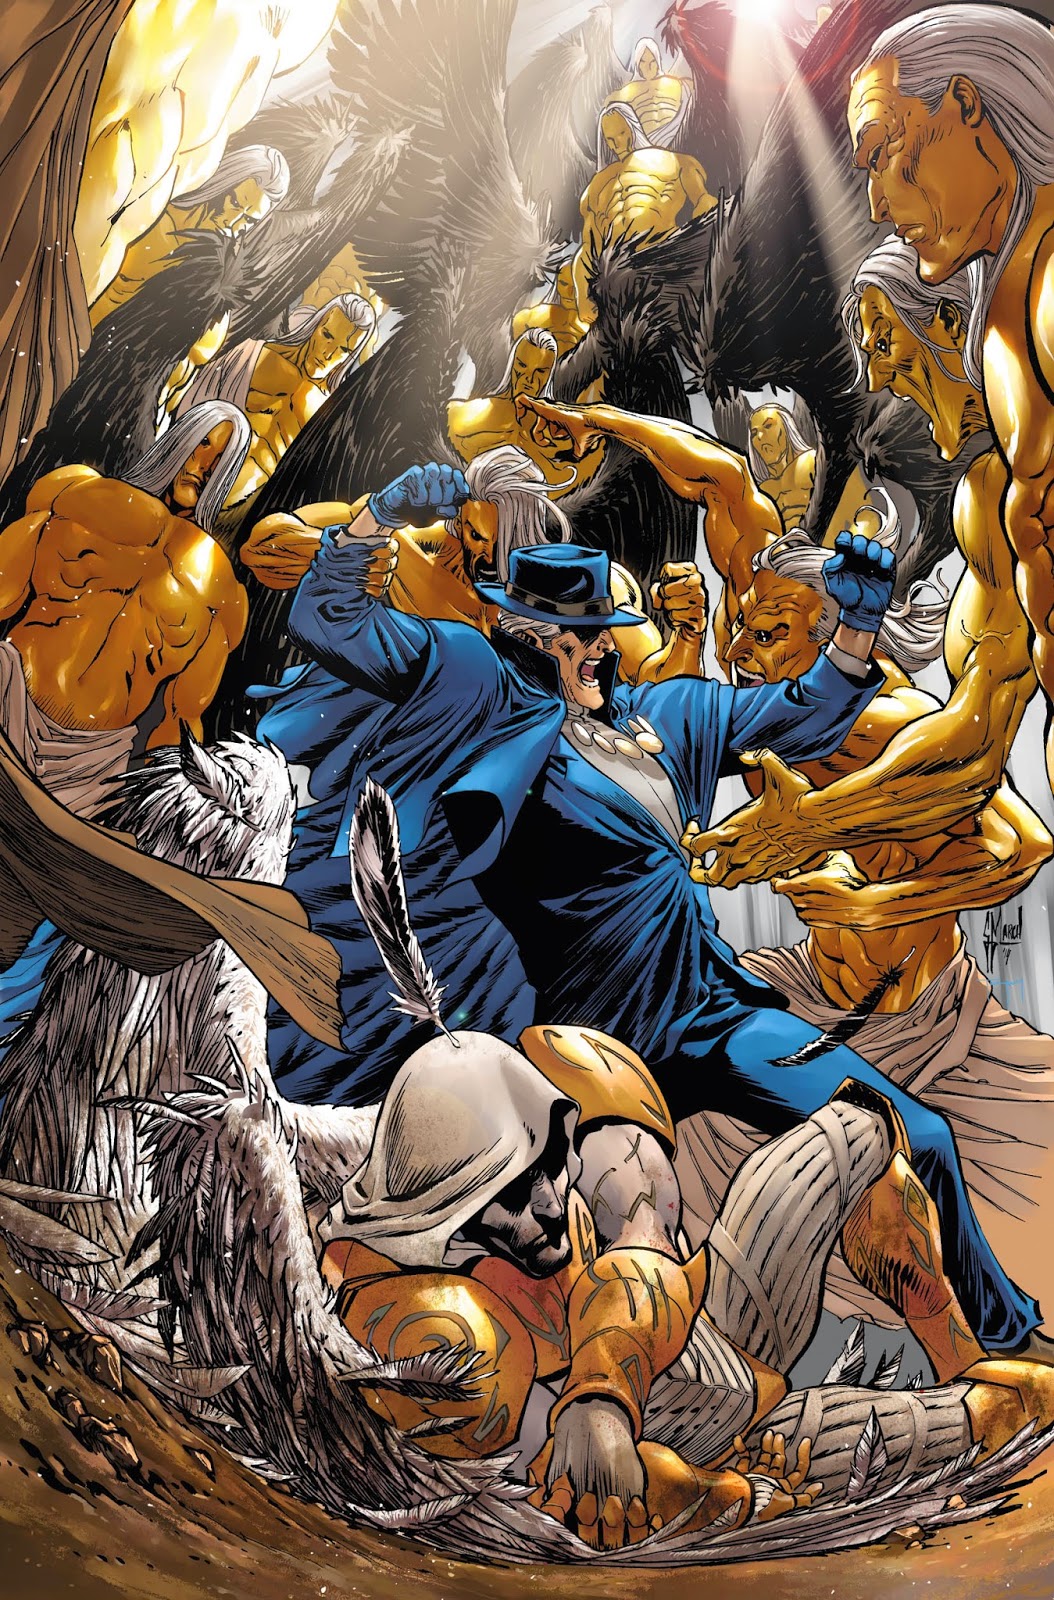 Making of a cover: PHANTOM STRANGER #21 by Guillem March